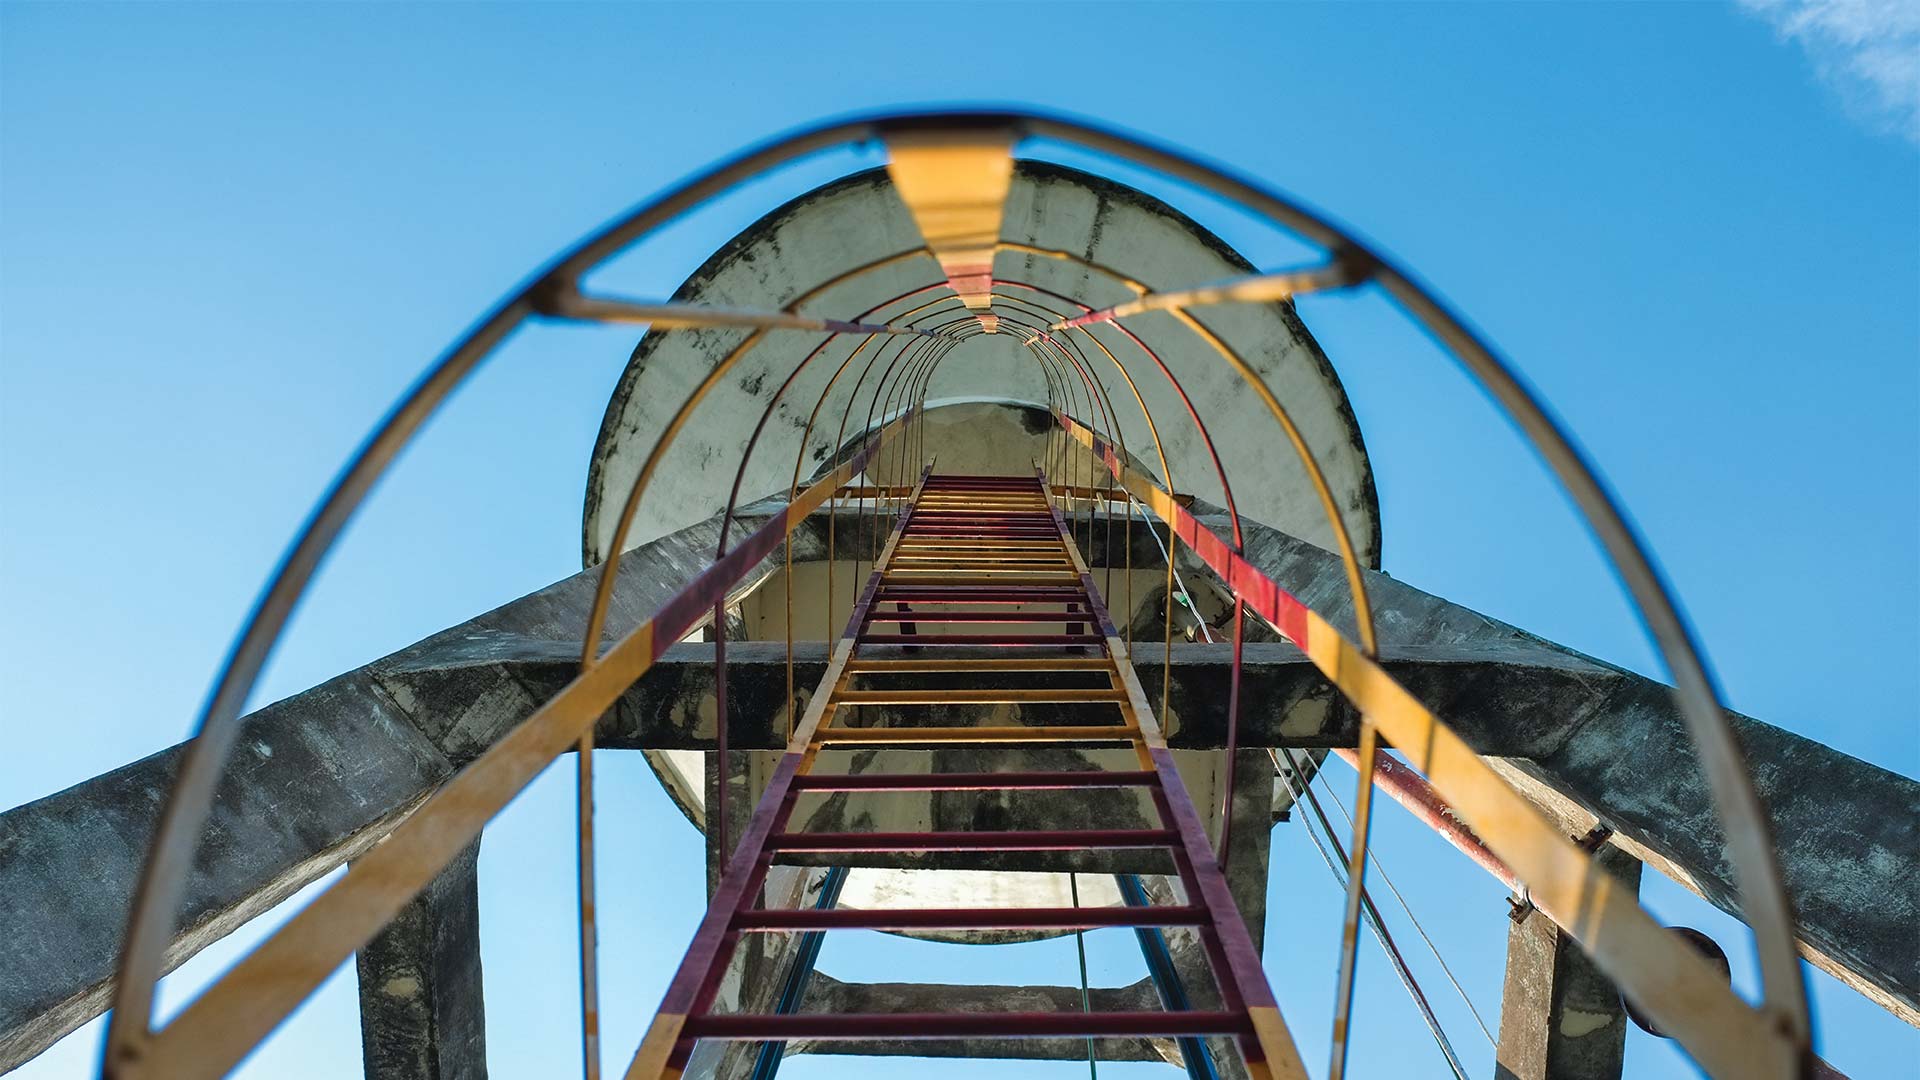 View inside a safety ladder tower